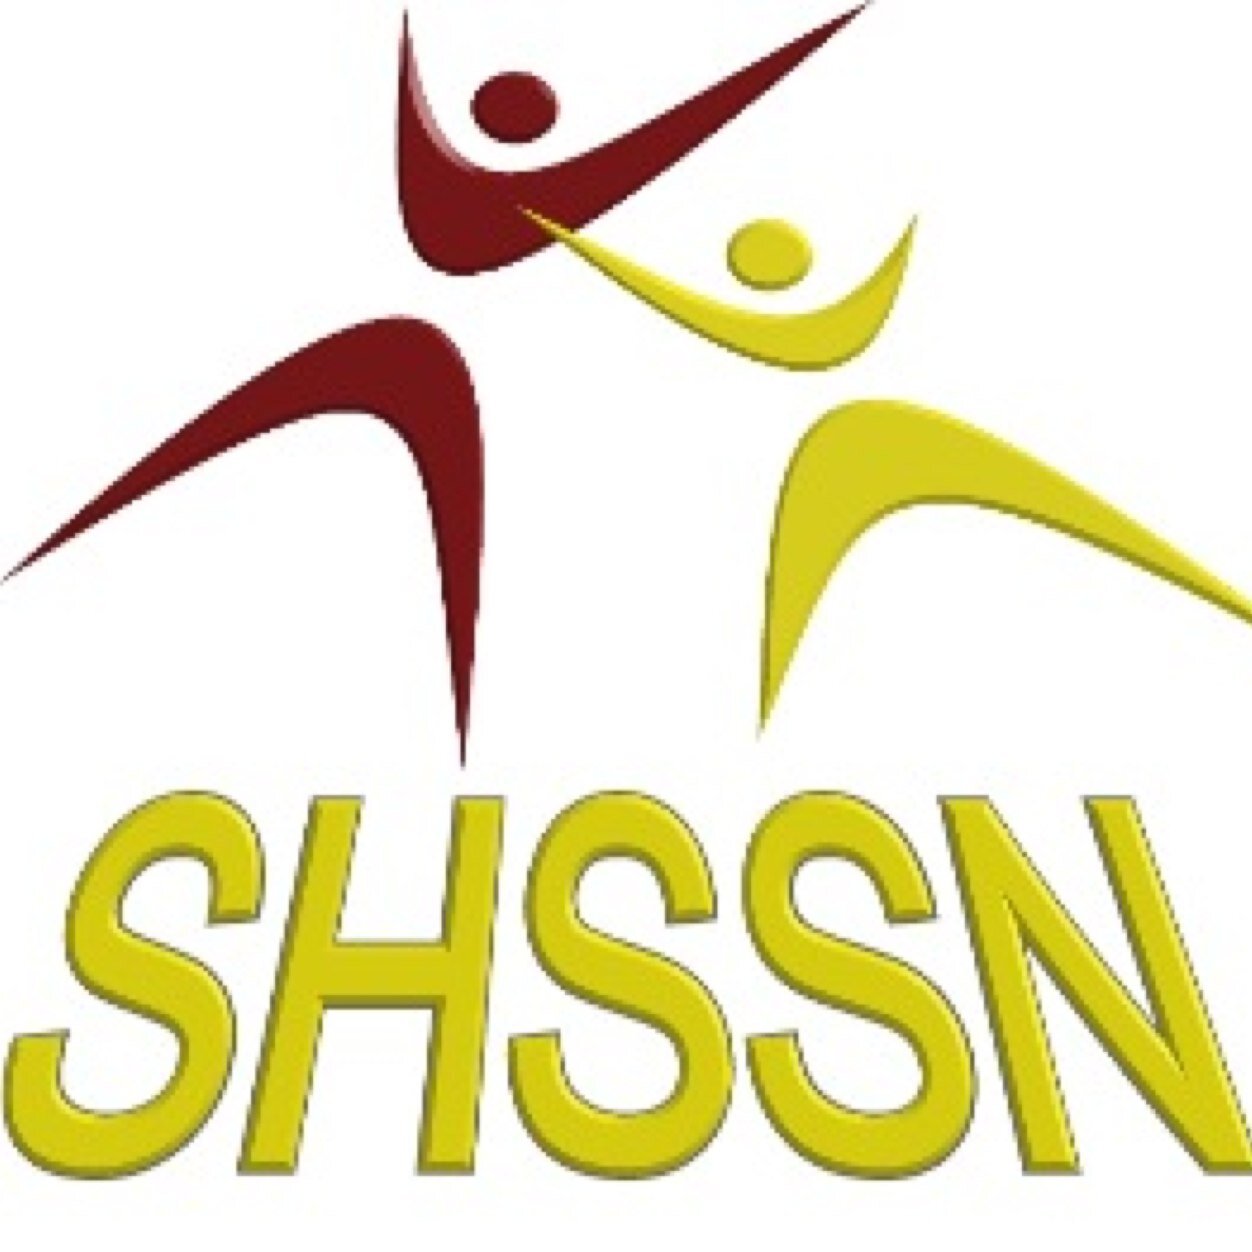 South Hillingdon School Sports Network: Working together to inspire through sport. SHSSN aims to enhance the lives of all students by taking part in sport.